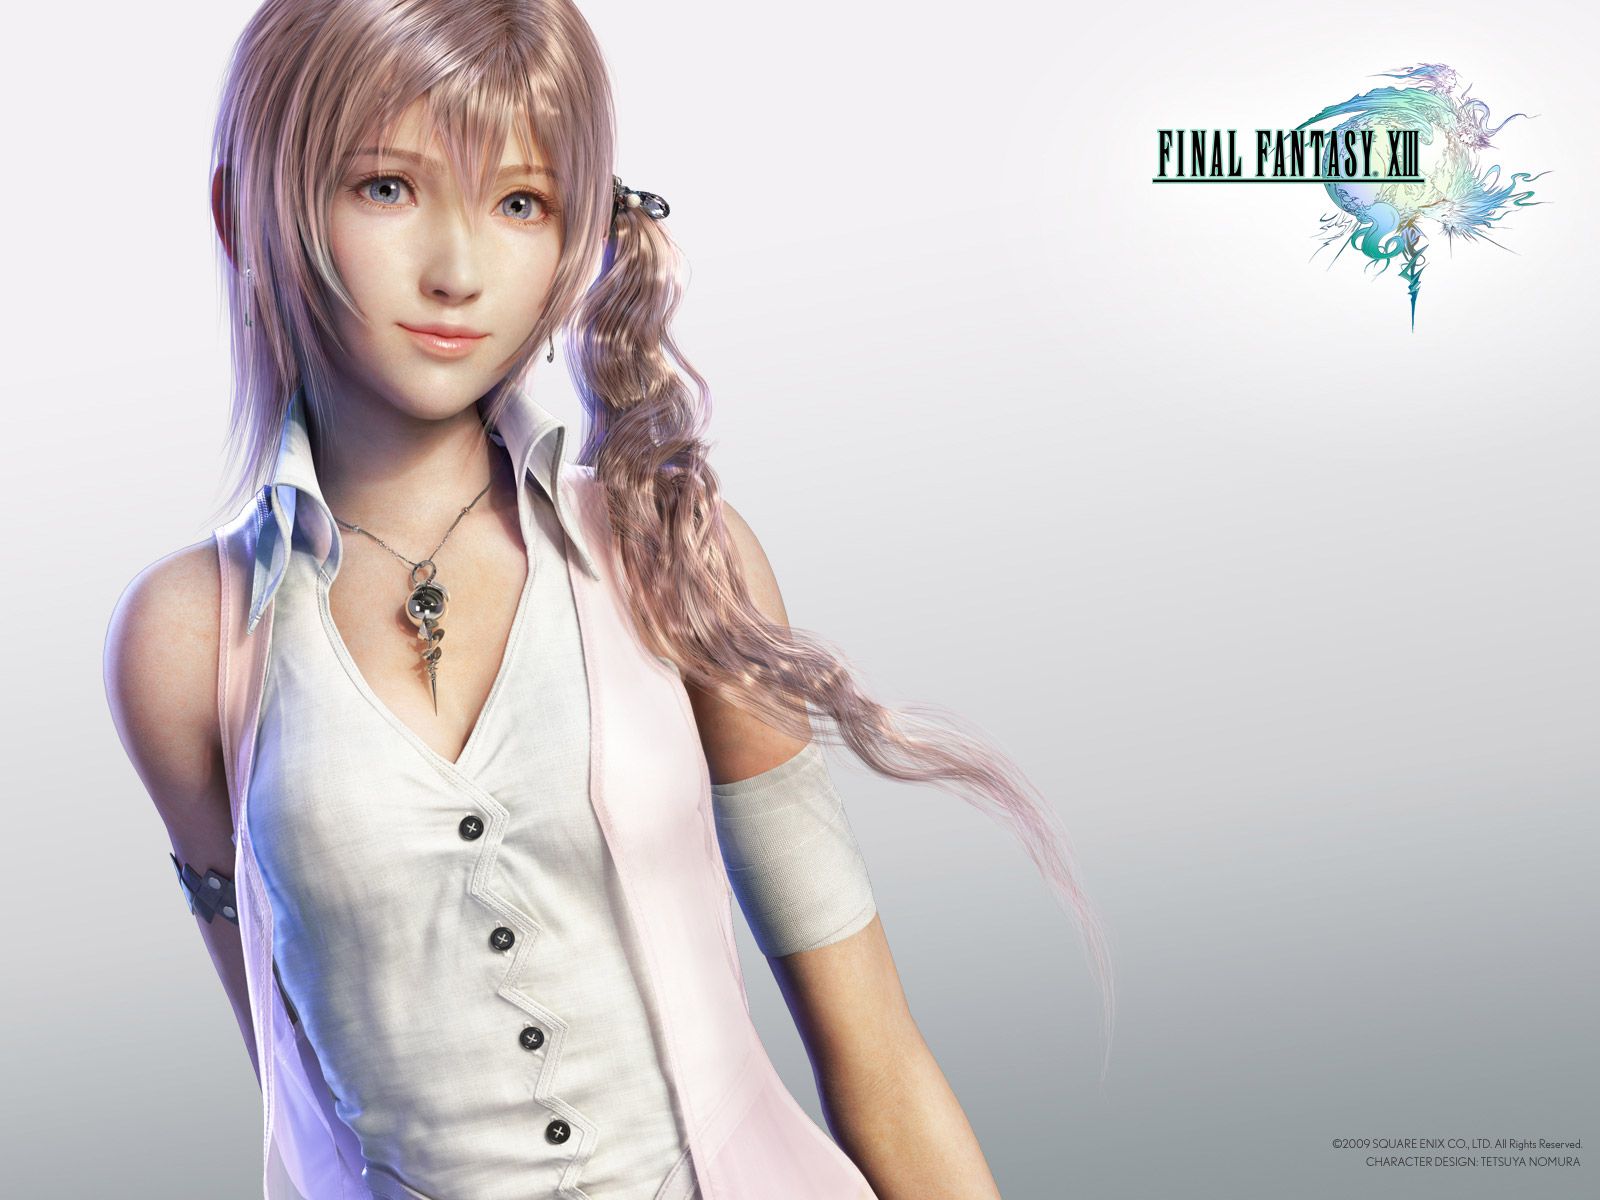 Final Fantasy XIII Game 3 Wallpapers | HD Wallpapers